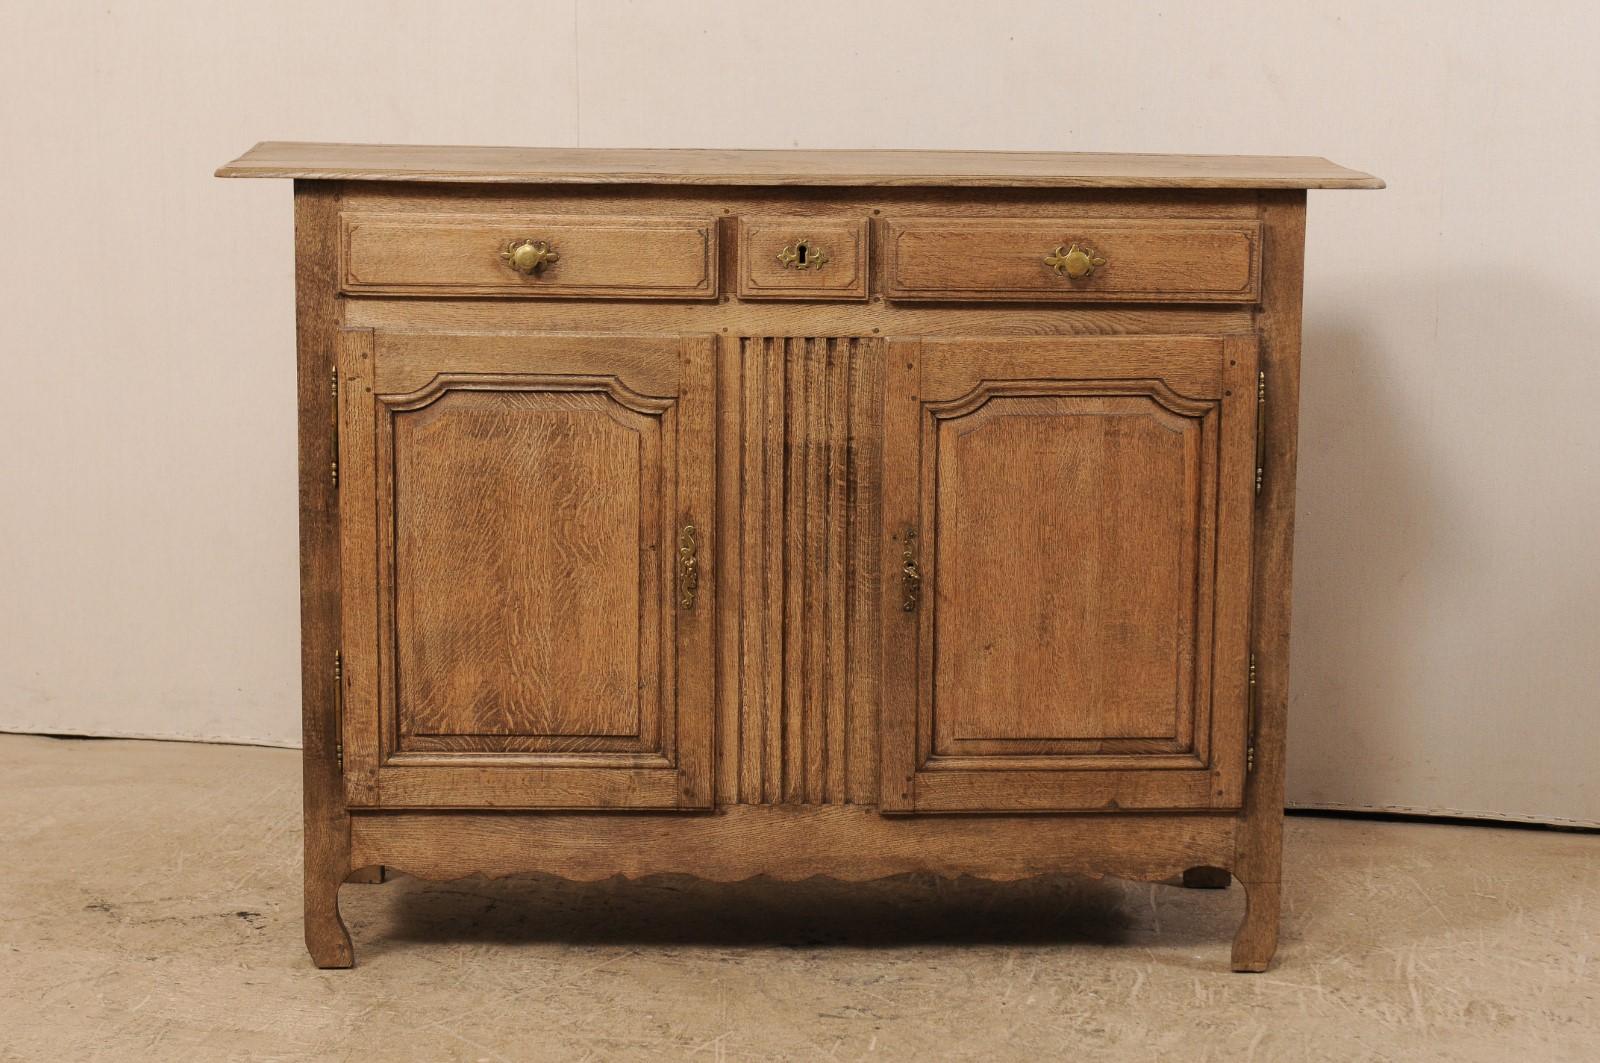 A French bleached oak buffet cabinet from the early 19th century. This antique cabinet from France features a rectangular-shaped top with rounded edges, above three panel-front drawers (a smaller center drawer flanked by a pair of longer drawers),